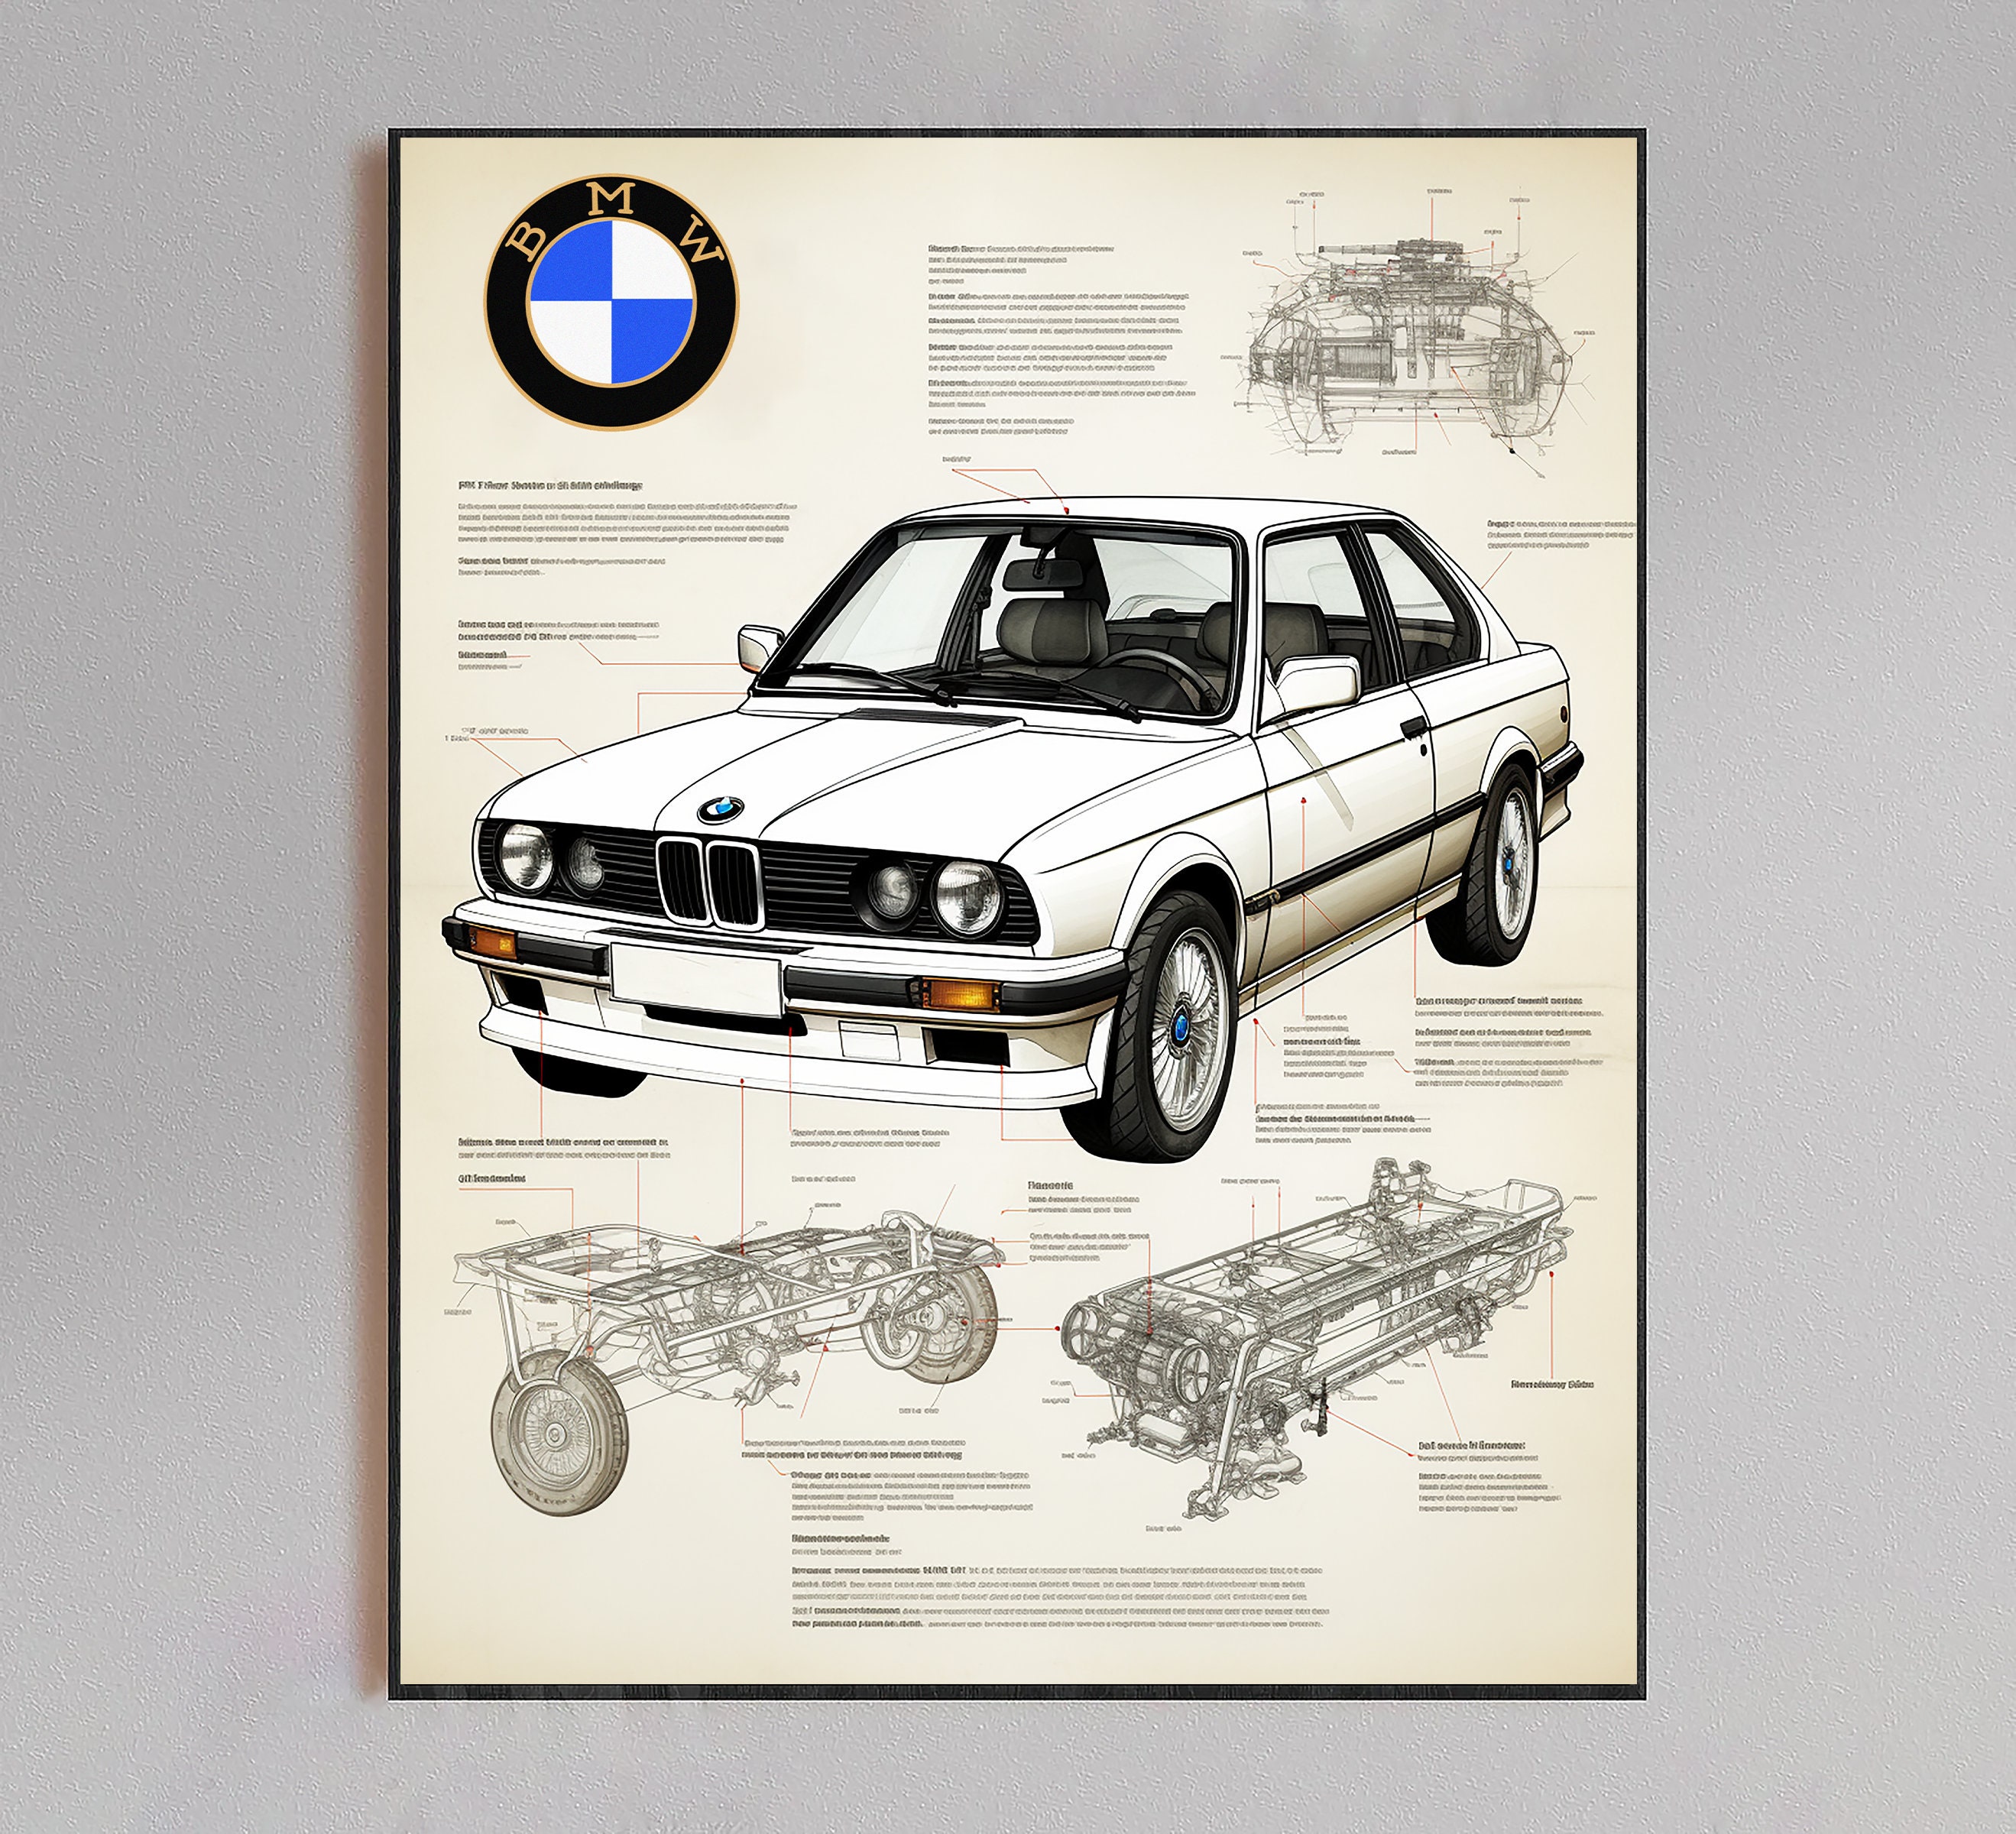  ART POSTER - BMW M3 Generation - Size 24'' x 36'' -  Illustration of Bmw E30, E36, E46, E90, E92 Wall Art for Garage or Home  Petrol Head Gift: Posters & Prints